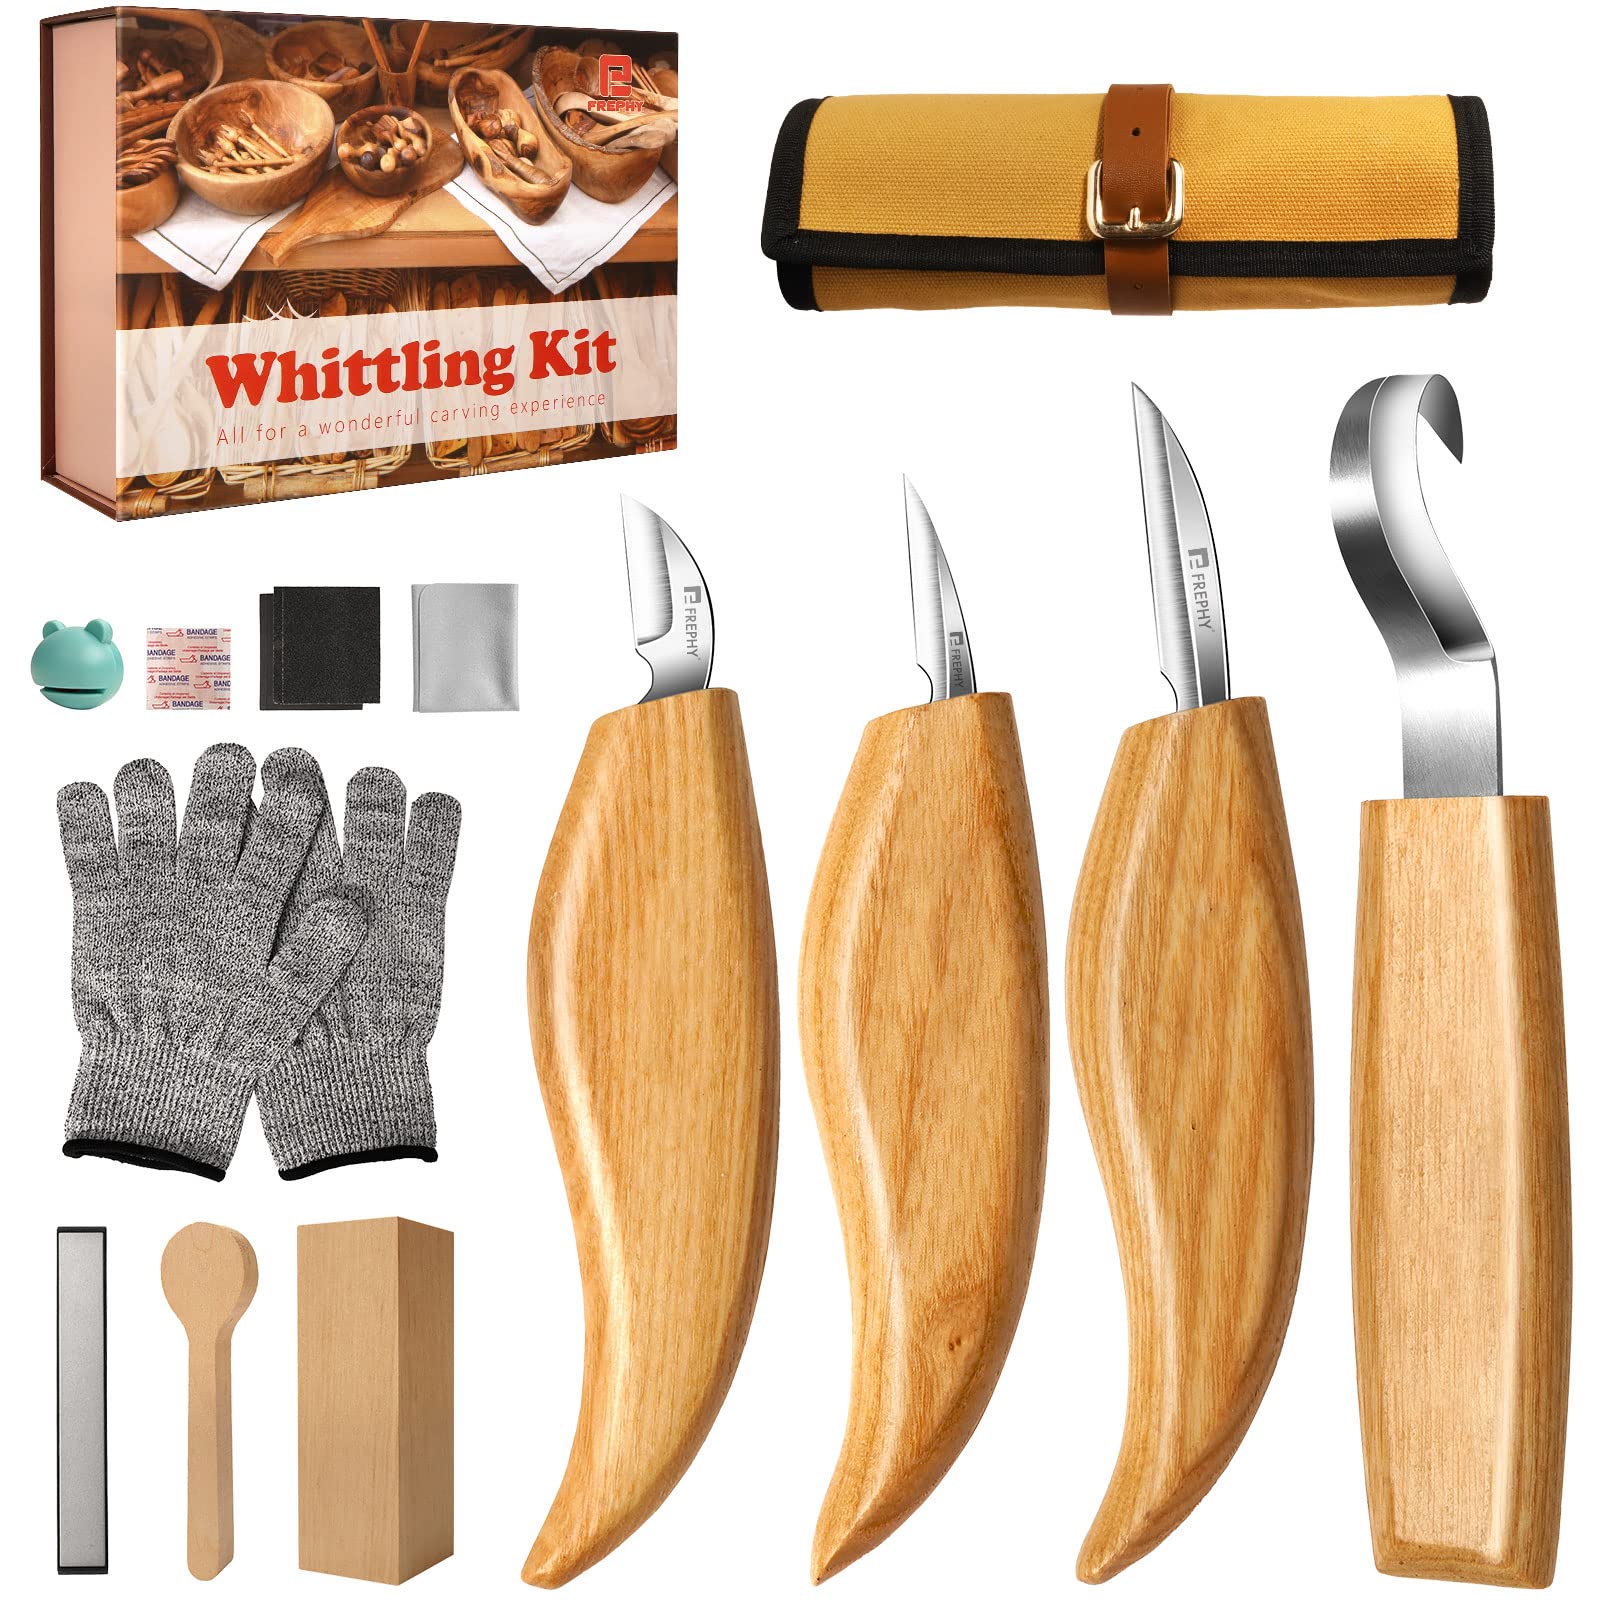 Frephy Wood Carving Kit for Beginners Whittling Kit for Beginners